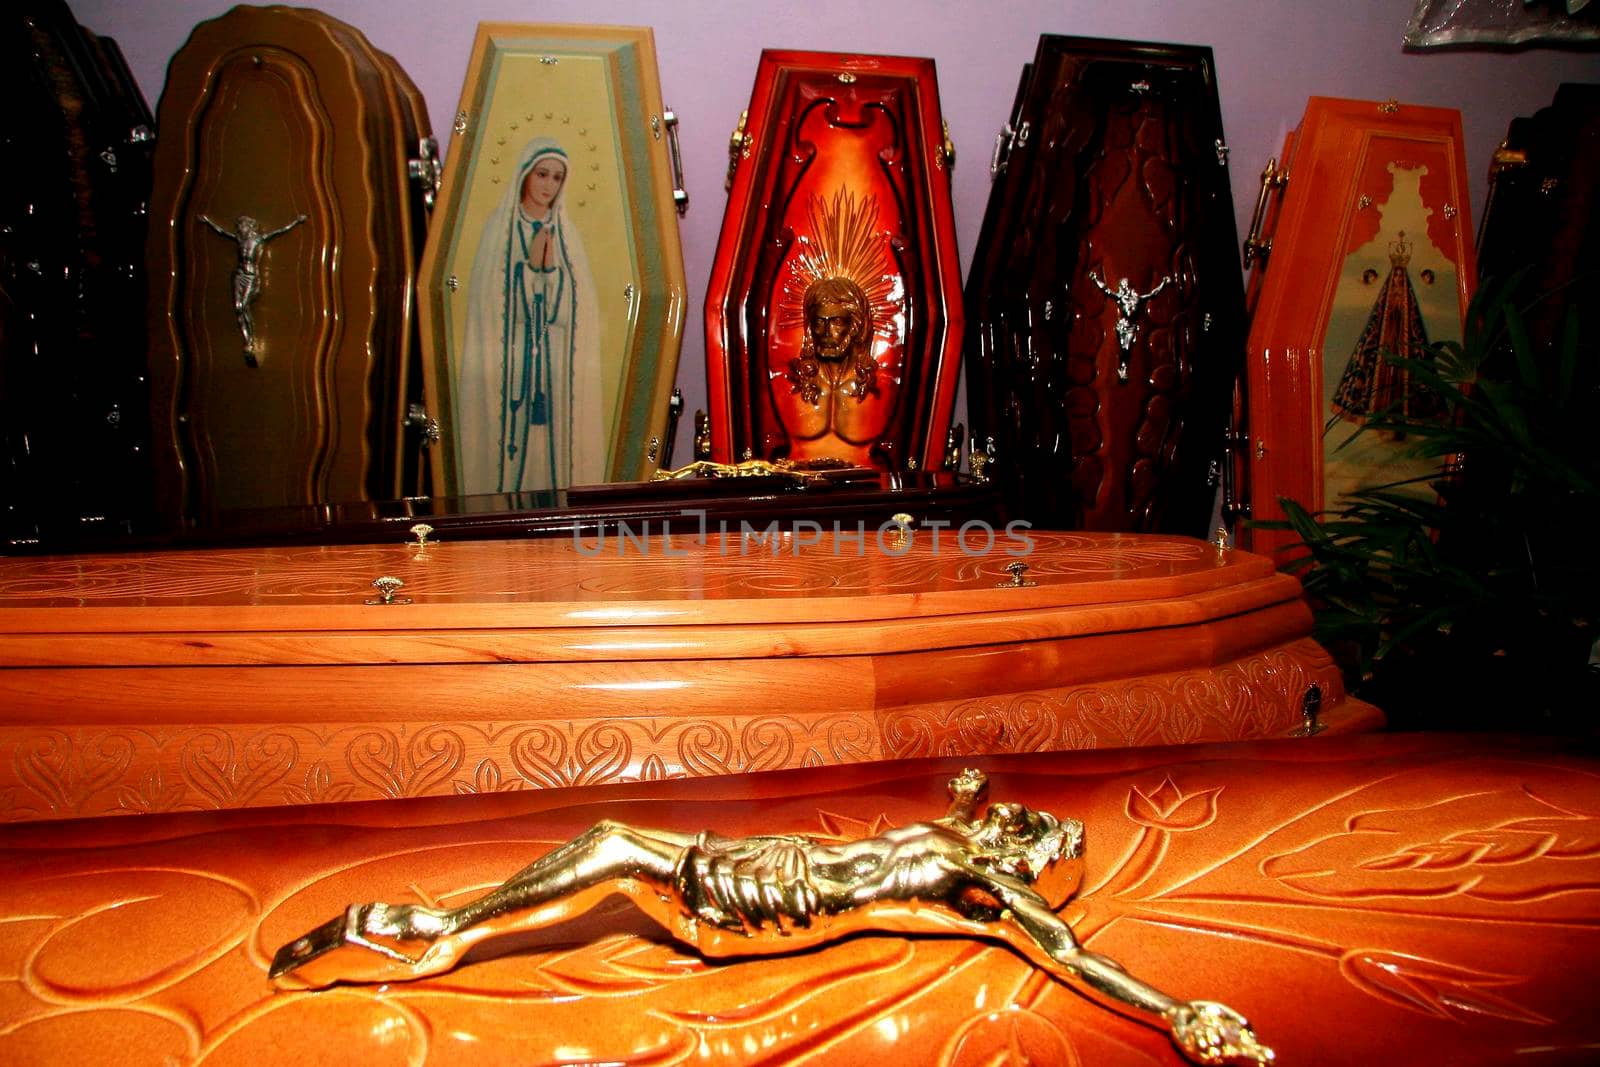 eunapolis, bahia / brazil - march 18, 2009: Funeral urn is seen at Dead Man's Coffin sale store in Eunapolis City.


